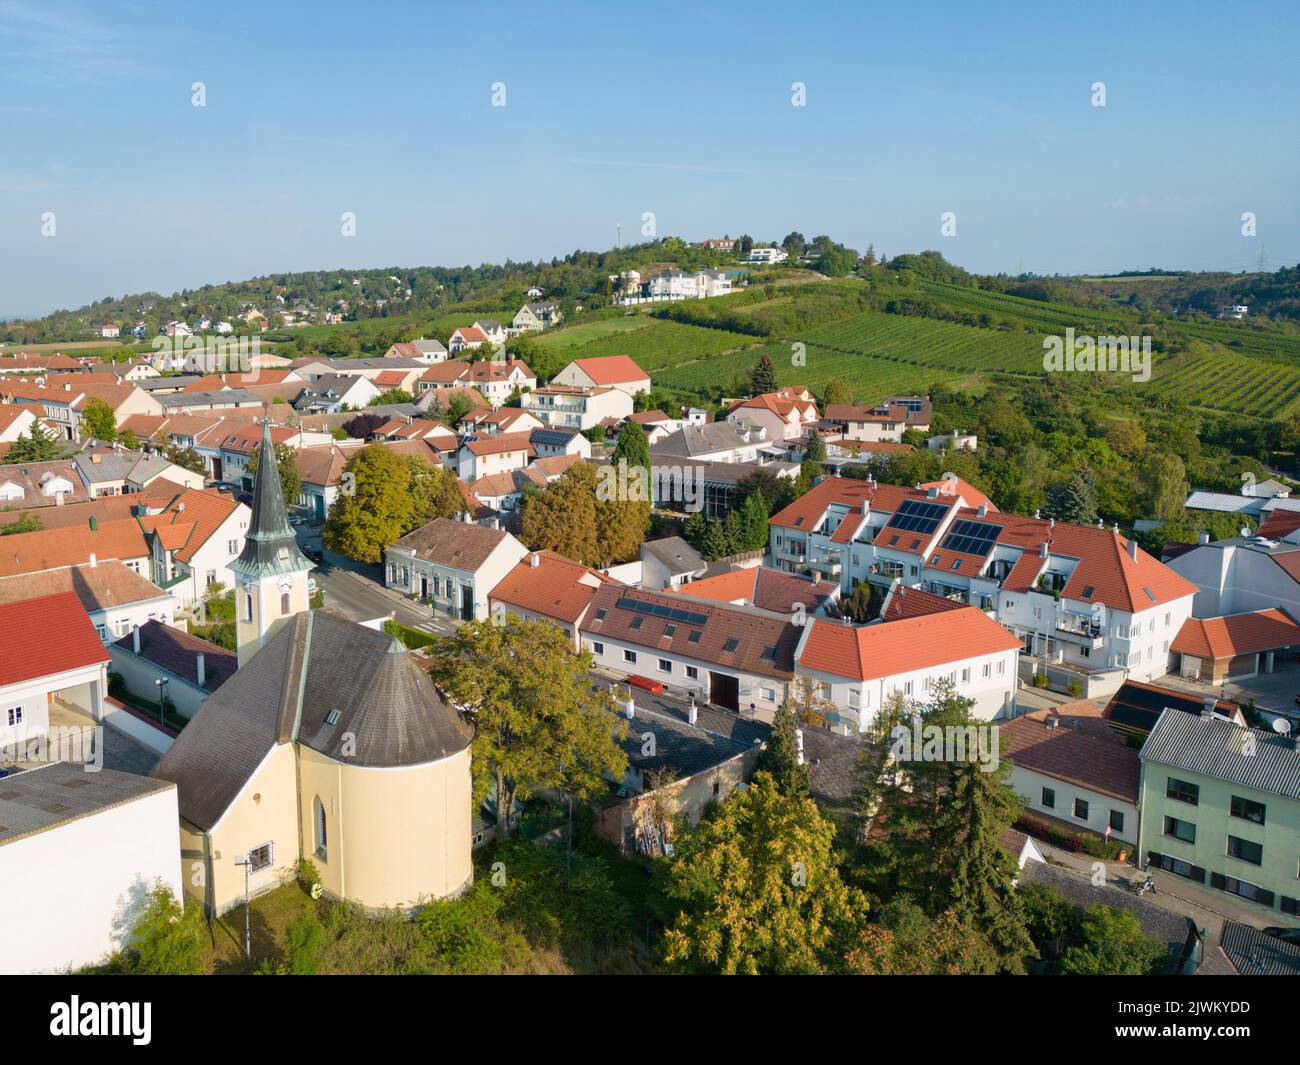 Hagenbrunn in Weinviertel. Aerial view of the famous town in Lower Austria. Stock Photo